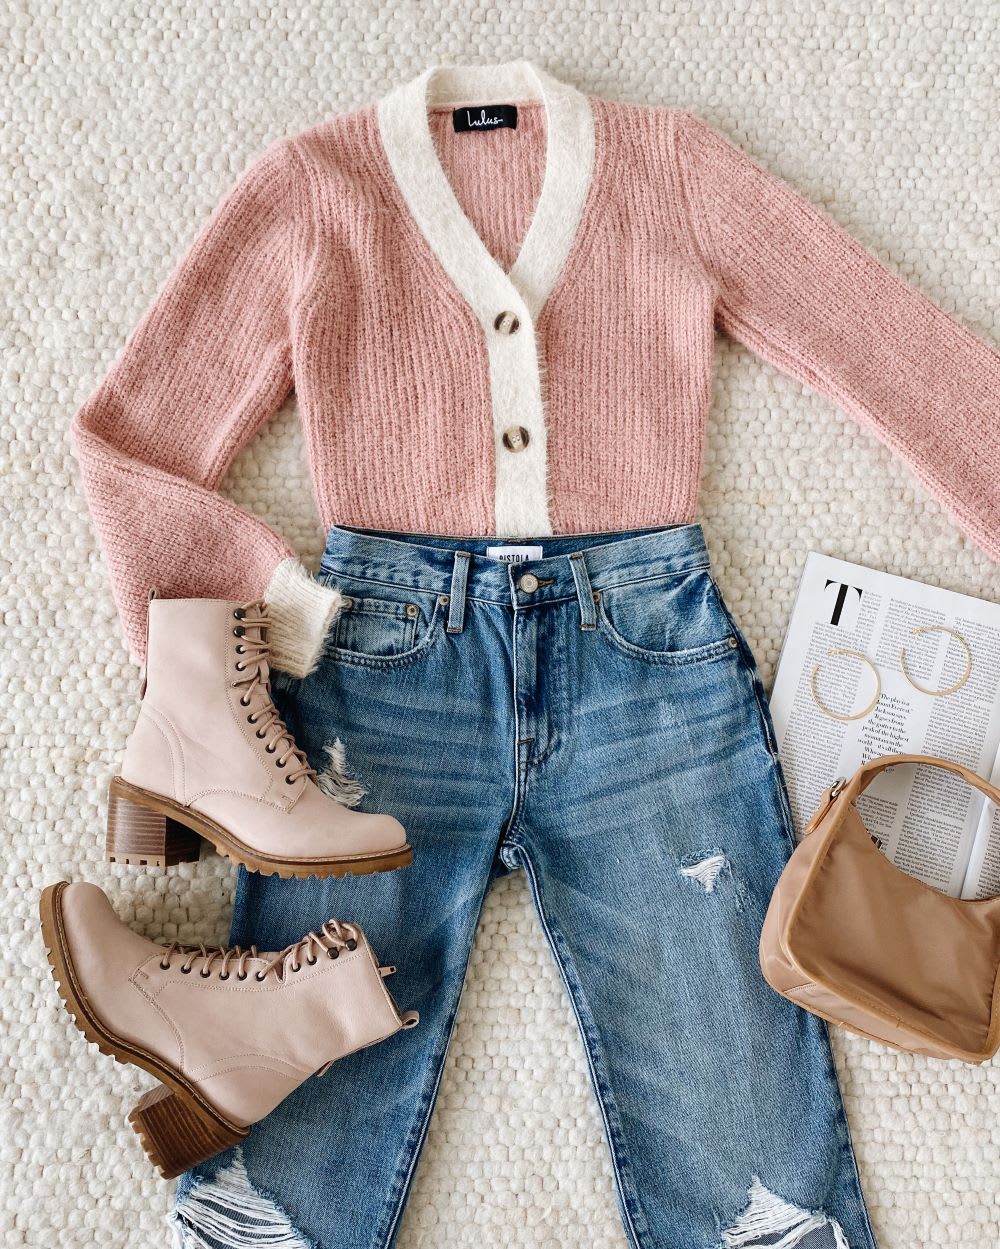 How To Style A Cardigan 14 Cardigan Outfits Who What Wear 